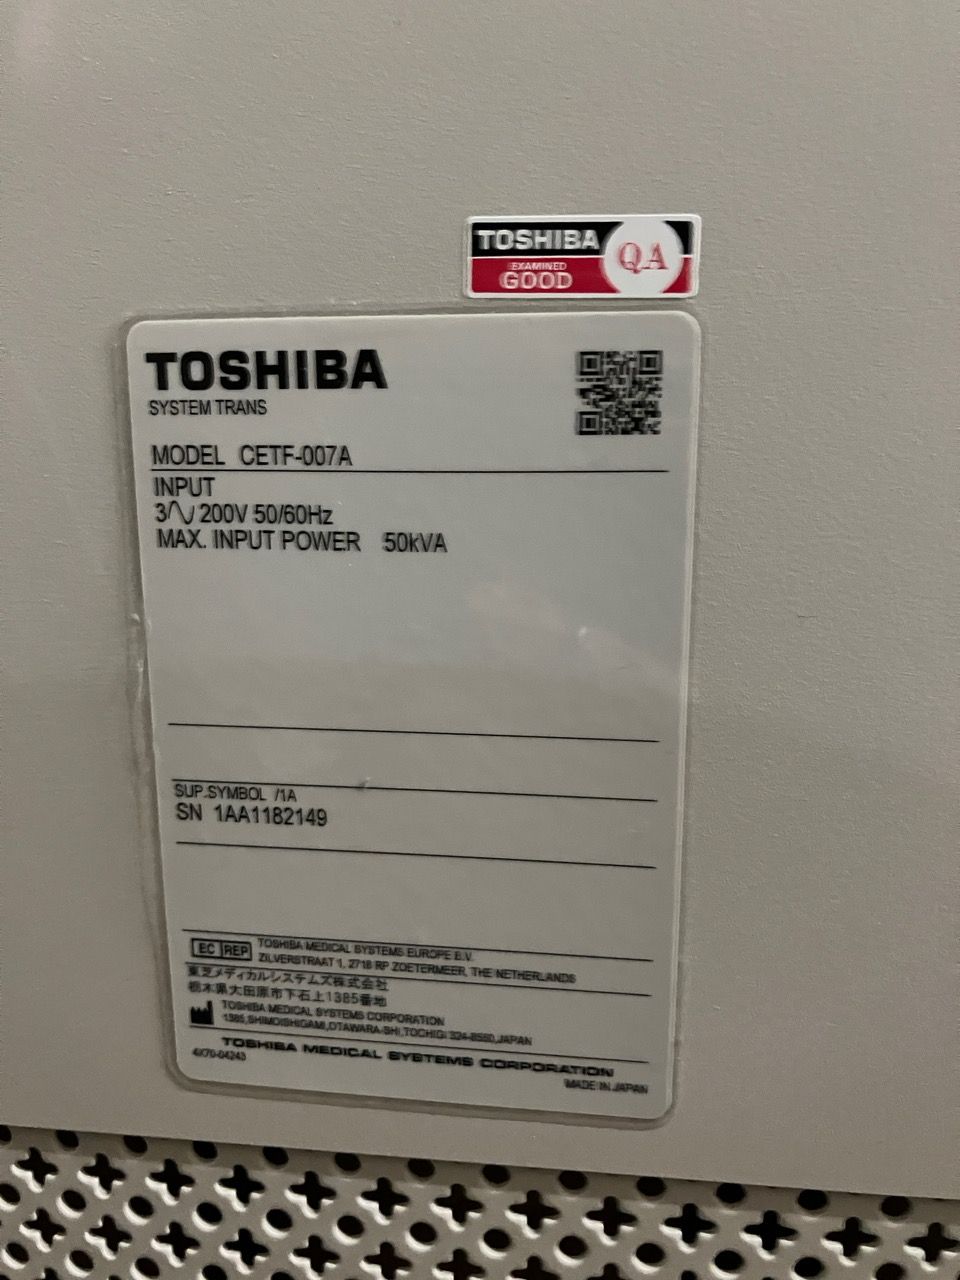 Toshiba Alexion 16, Year-2011, Tube(CXB-200)2mhu with exposure count 67,495 by 12th December 2023. Deinstallation-13th April 2024.